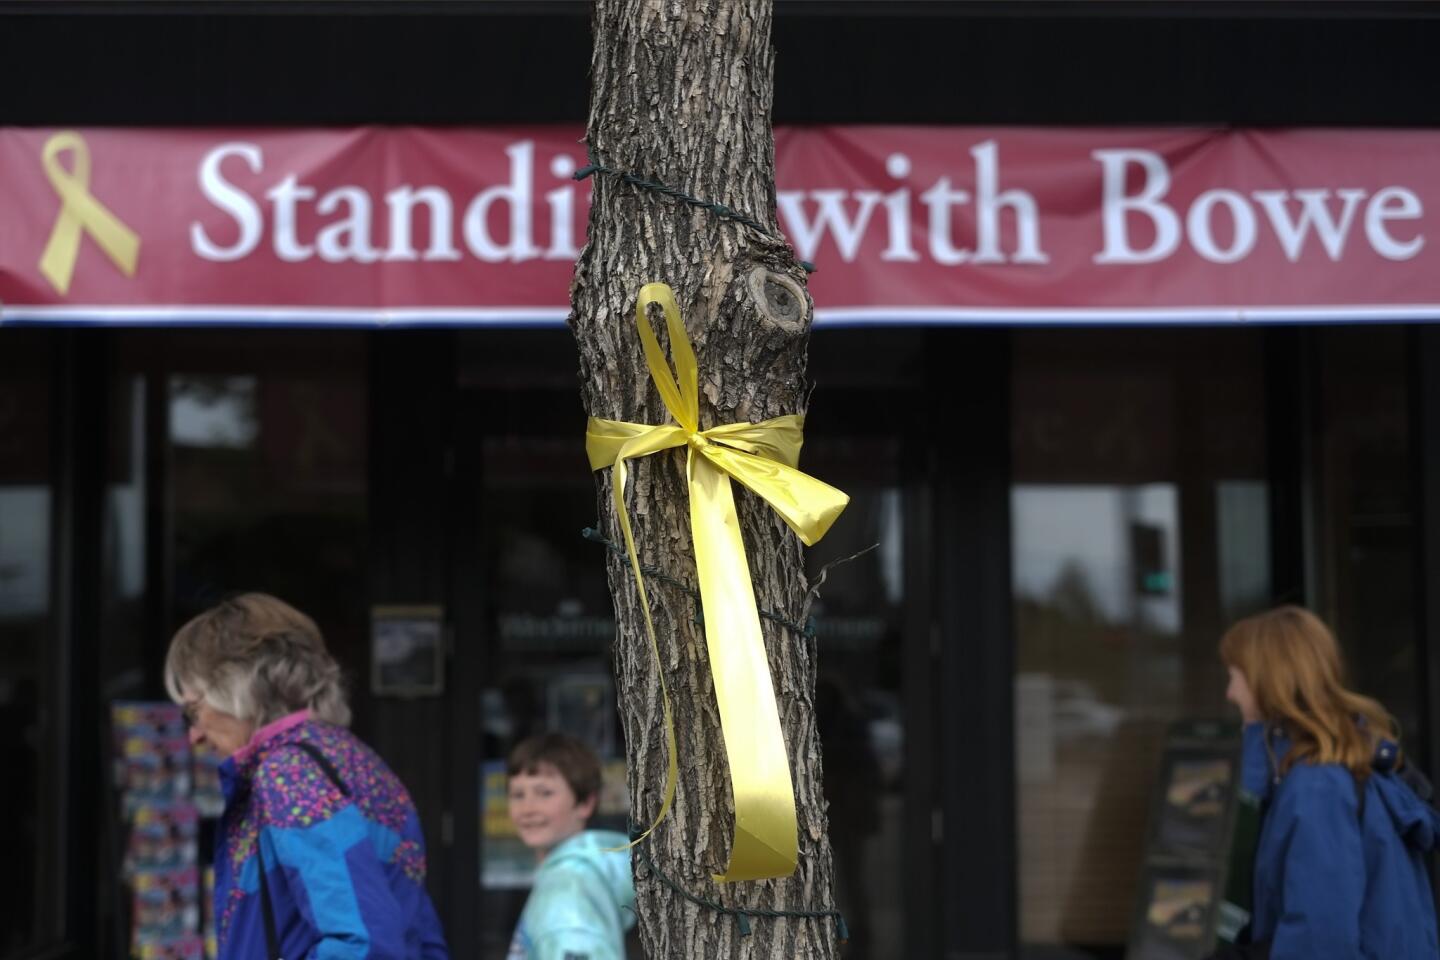 A yellow ribbon honoring captive U.S. Army Sgt. Bowe Bergdahl is tied to a tree in Hailey, Idaho.